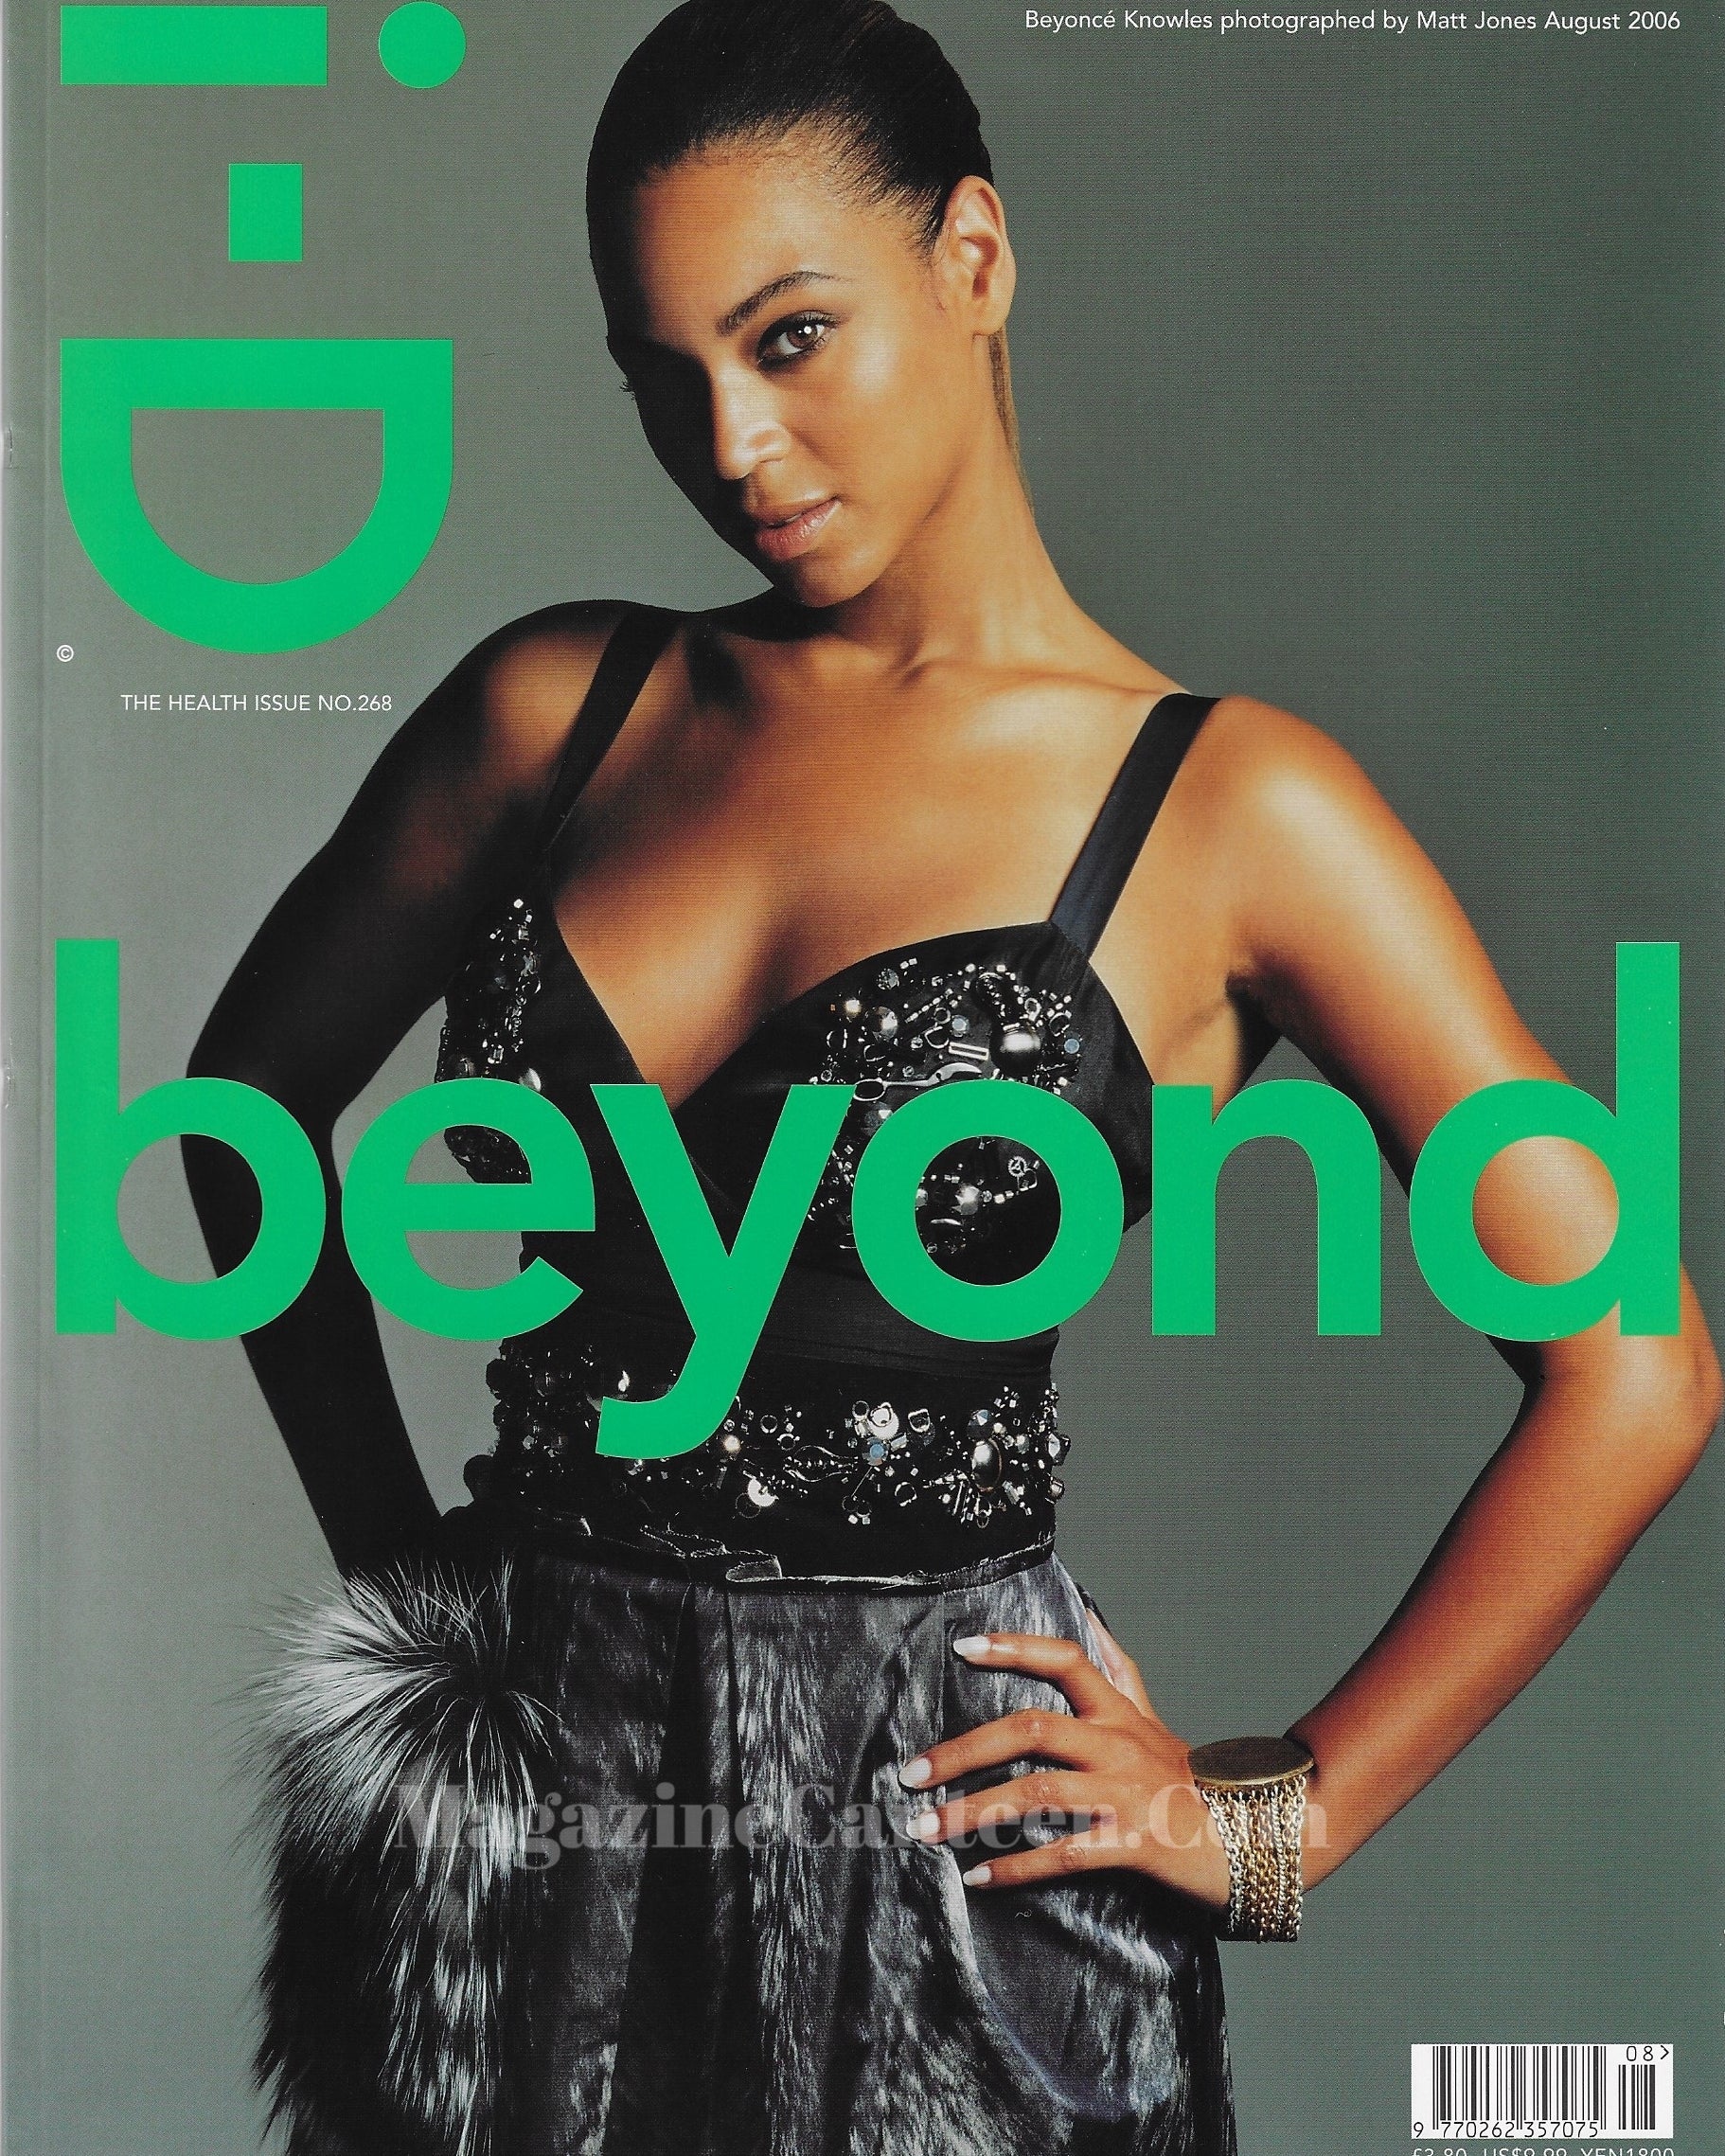 I-D Magazine 268 - Beyonce Knowles 2006